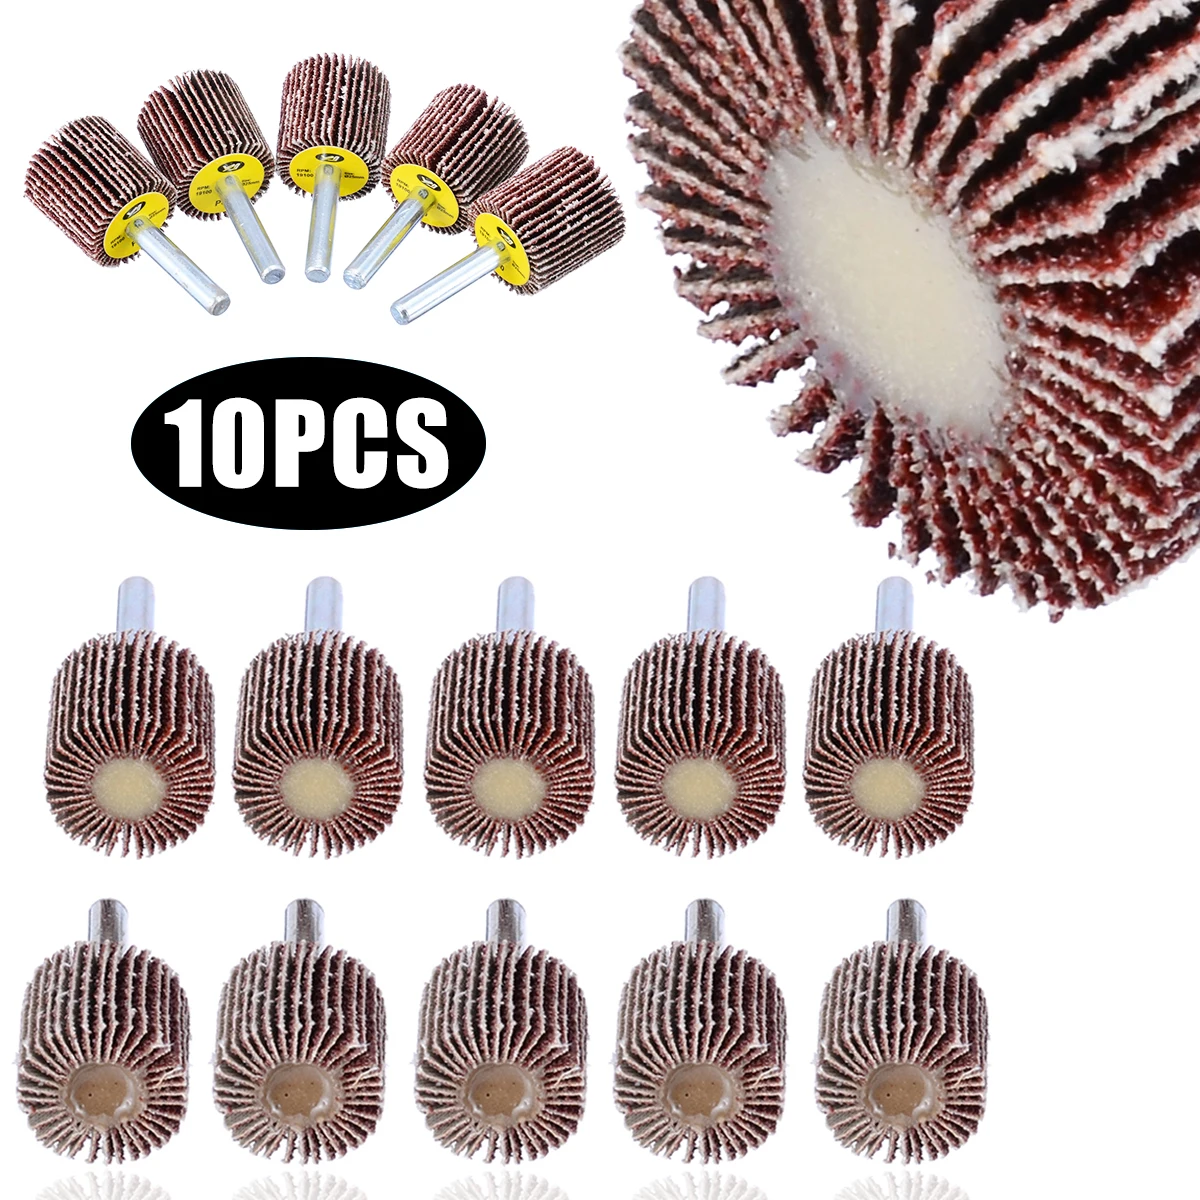 10pcs 50mm Grinding Polish Wheel 40/80 Grit Sanding Flap Disc Drill Abrasive Tool For Stainless Steel Pipe